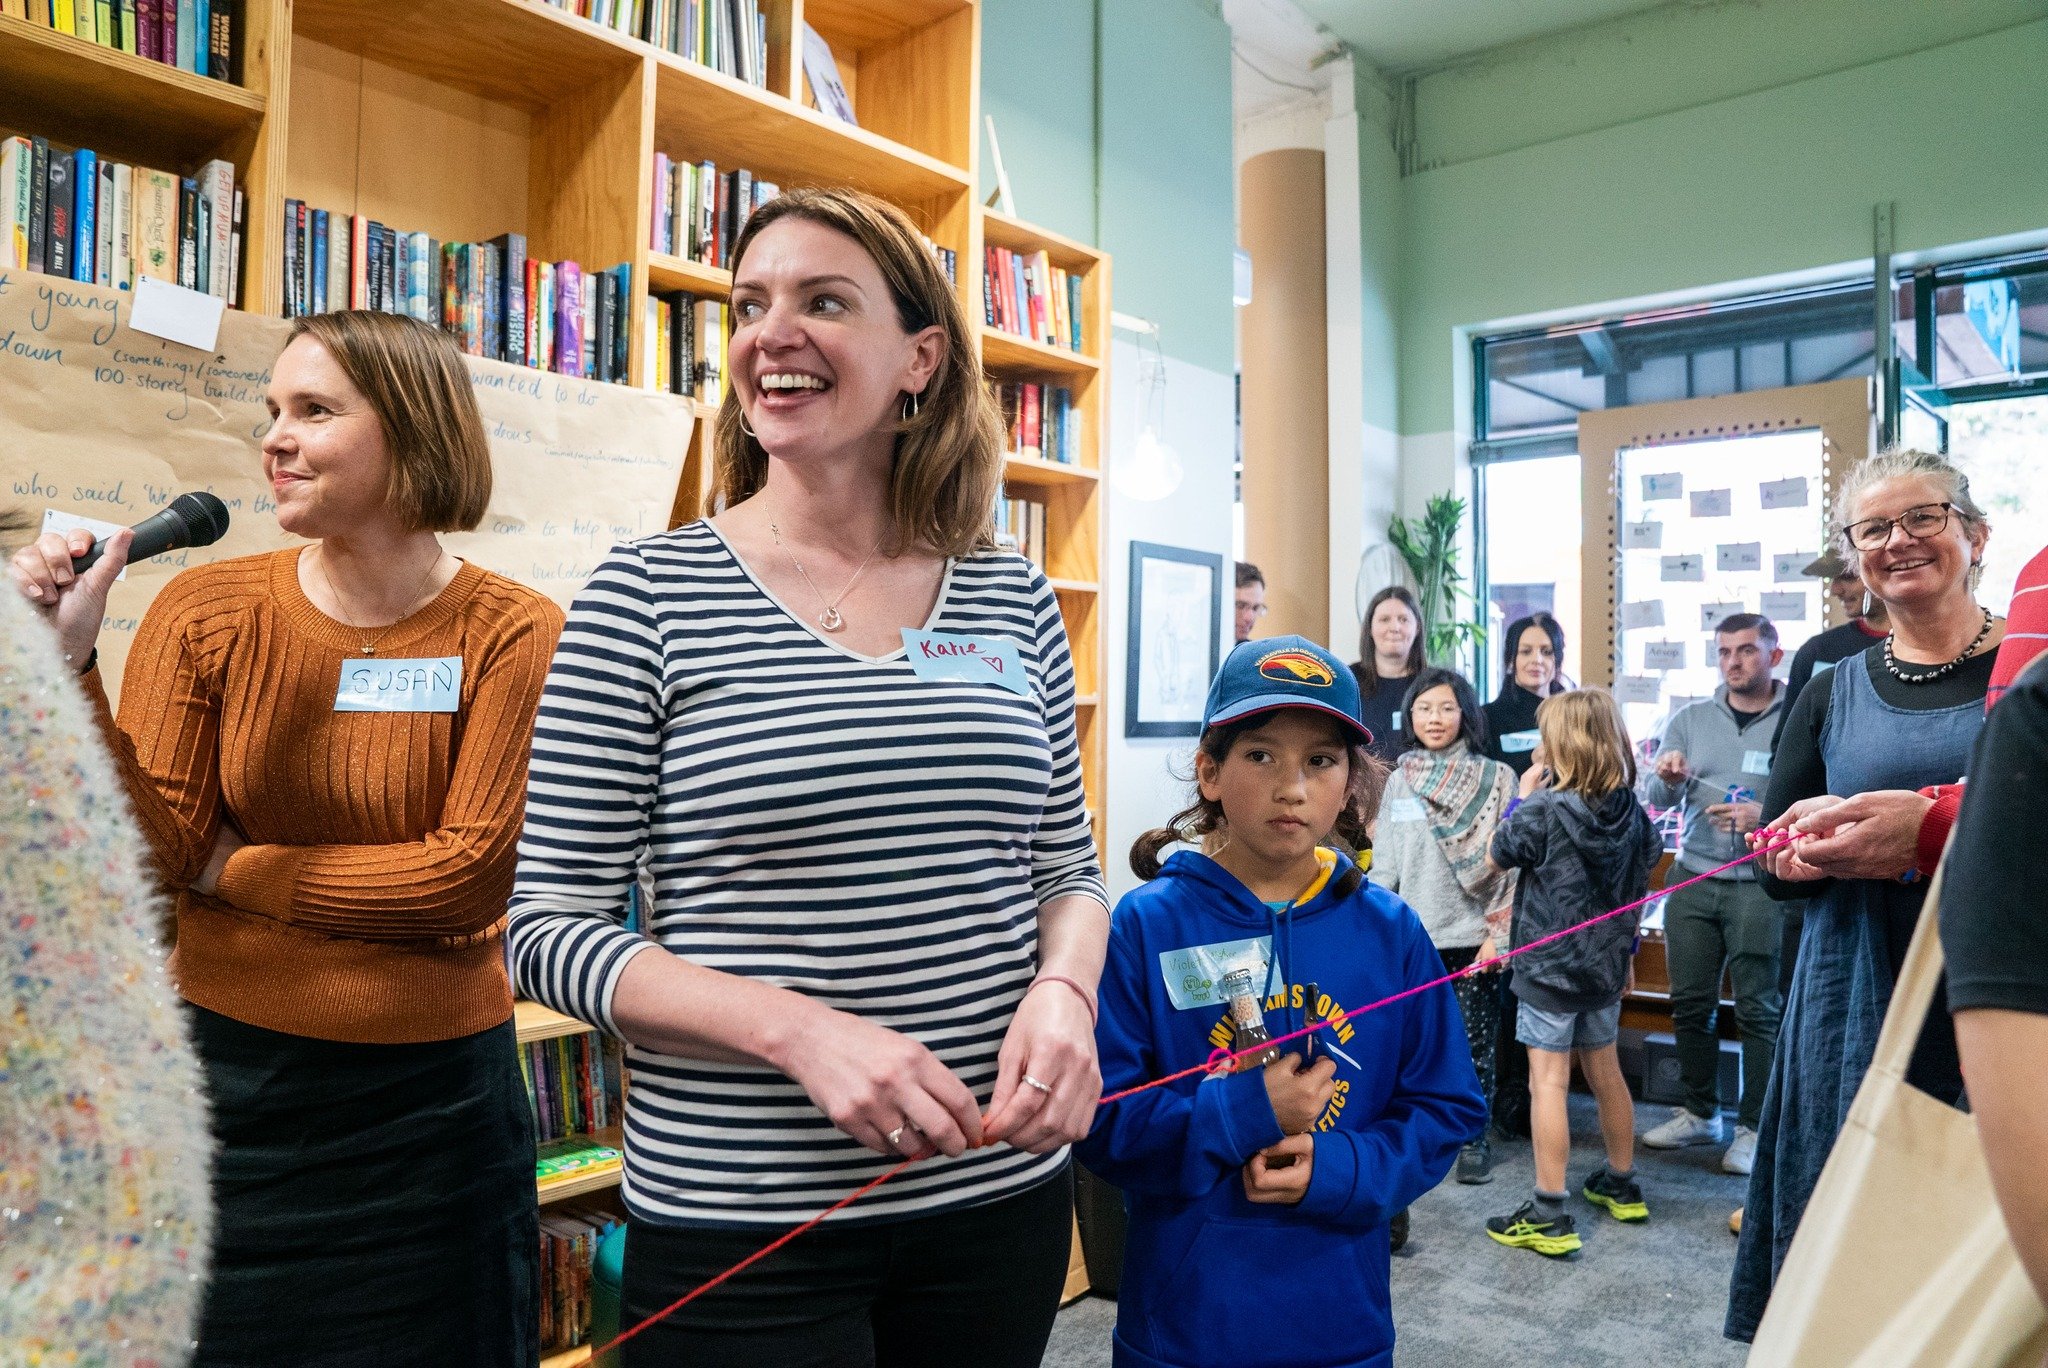 100 Story Building is a magical place - there's a trap door and a time machine -and the only thing stopping you is your own imagination.
 
Last week, 100 Story Building opened their new space thanks to the Victorian Government&rsquo;s West Gate Neigh